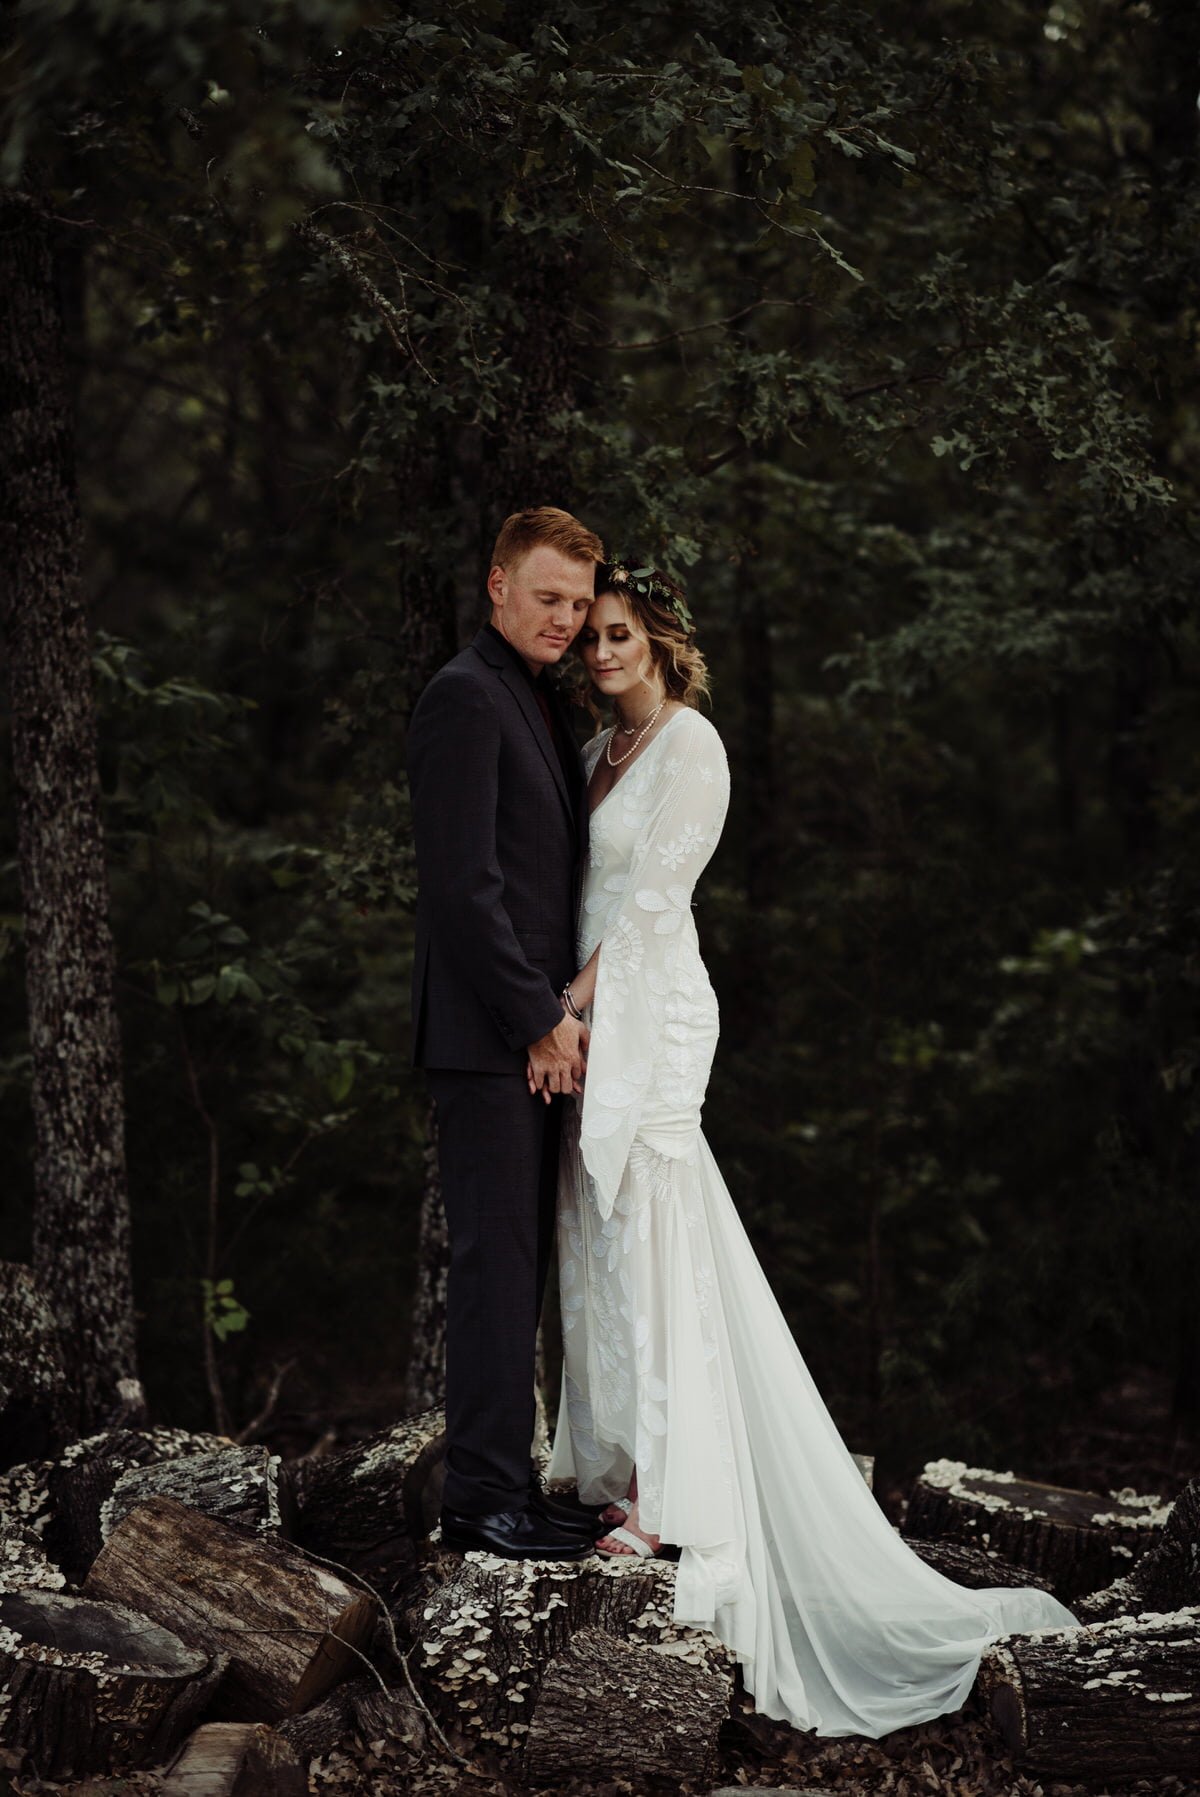 romantic bride and groom portrait in forest area